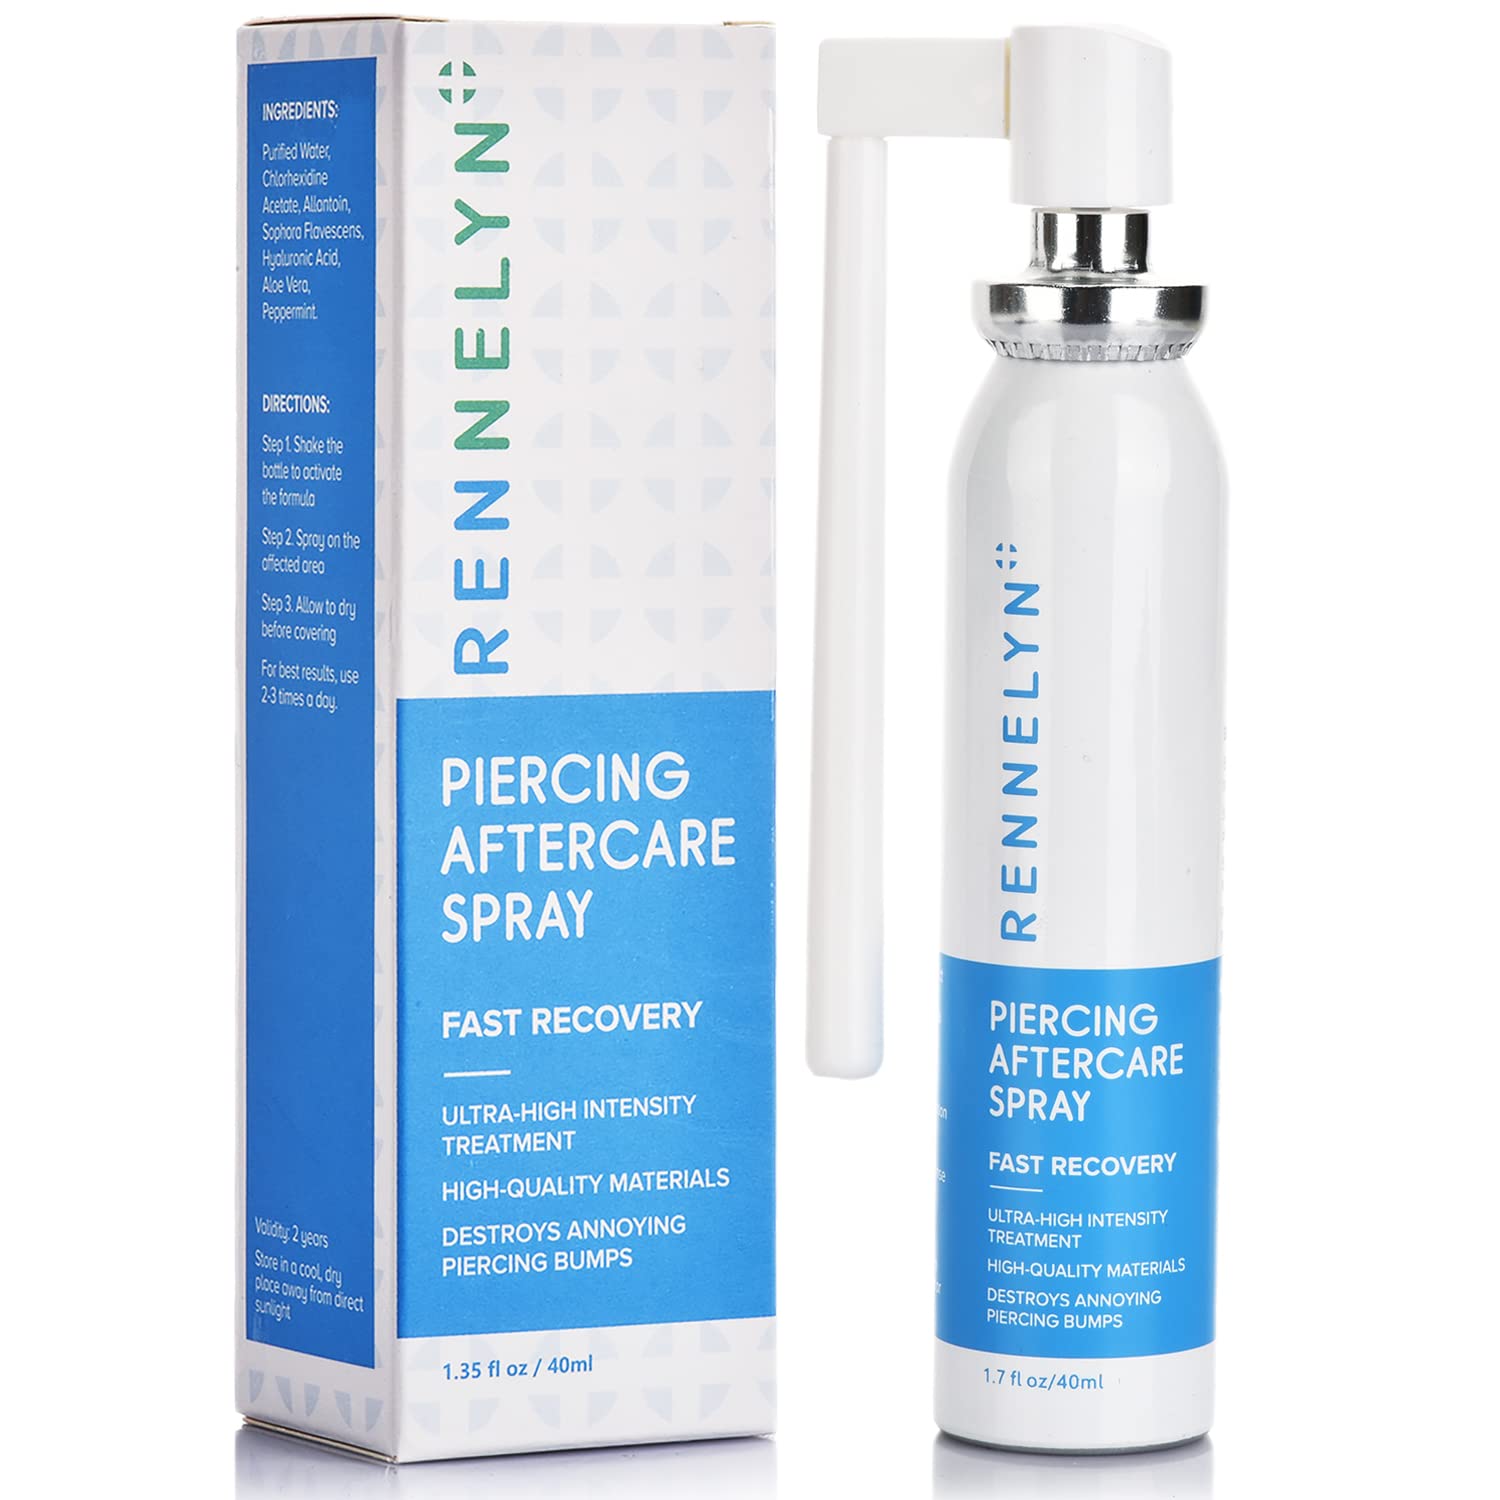 Rennelyn Piercing Aftercare Spray Piercing Cleaning Solution to Shrink Piercing Bumps and Heal New Stretched Piercings Soothing Mist 40ml